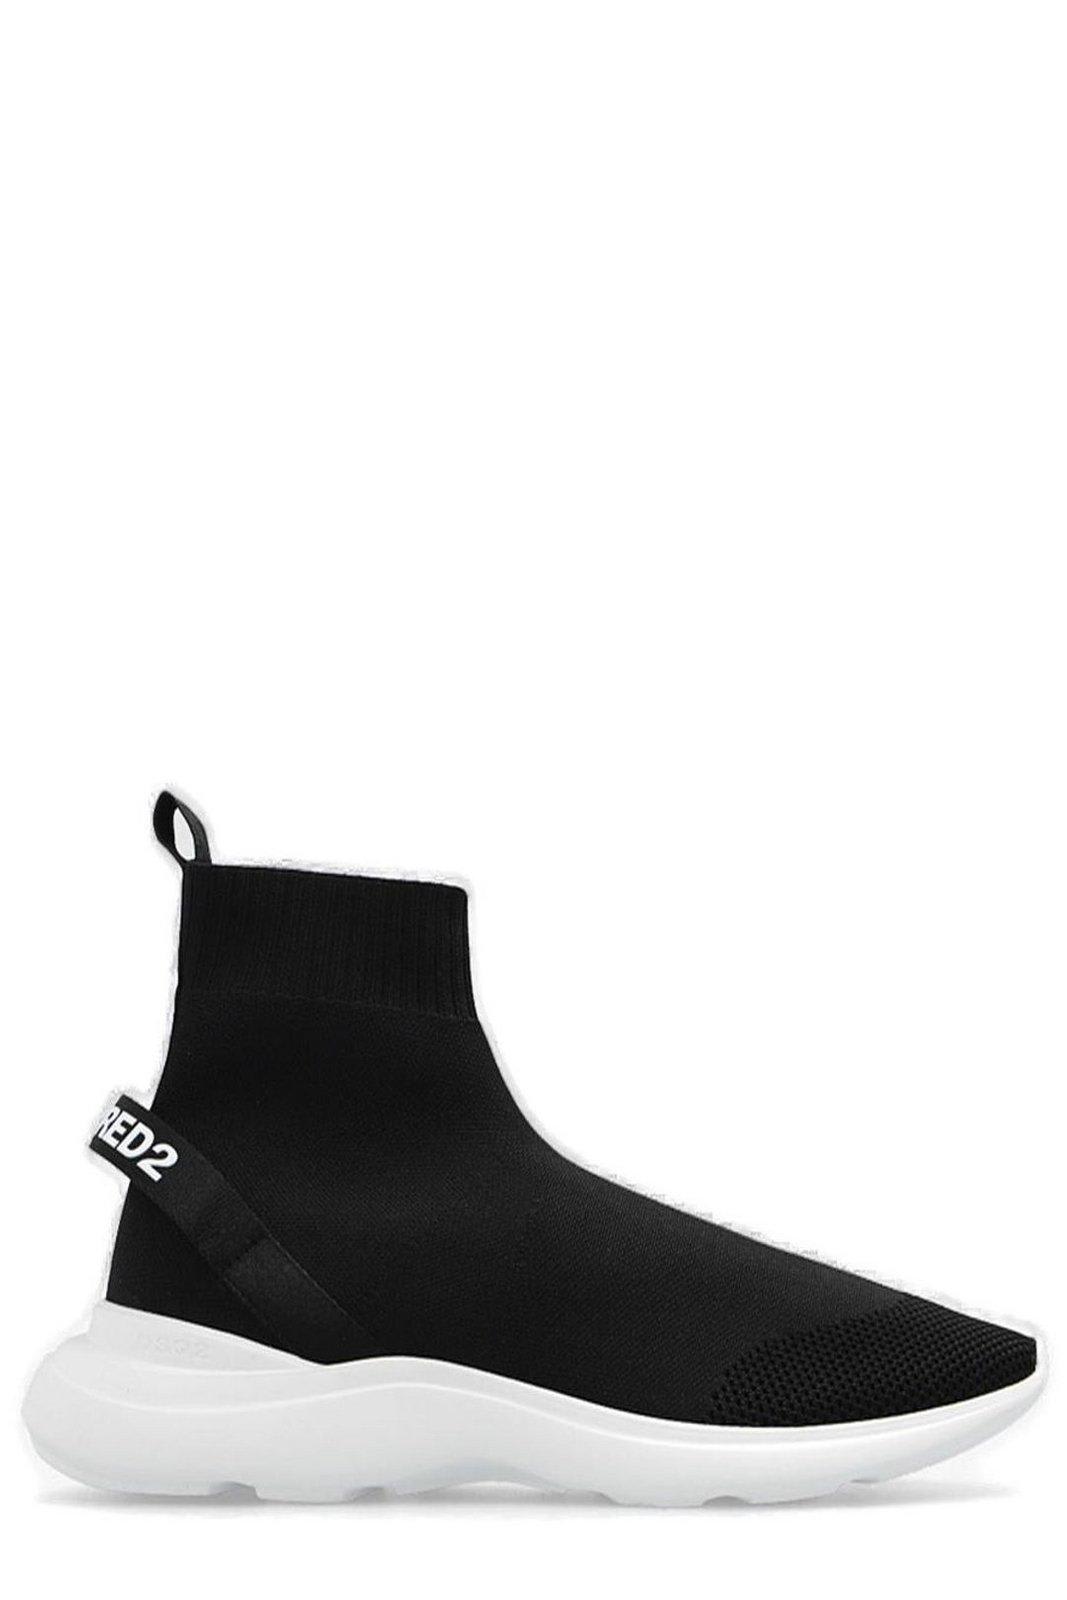 DSQUARED2 FLY SOCK SNEAKERS